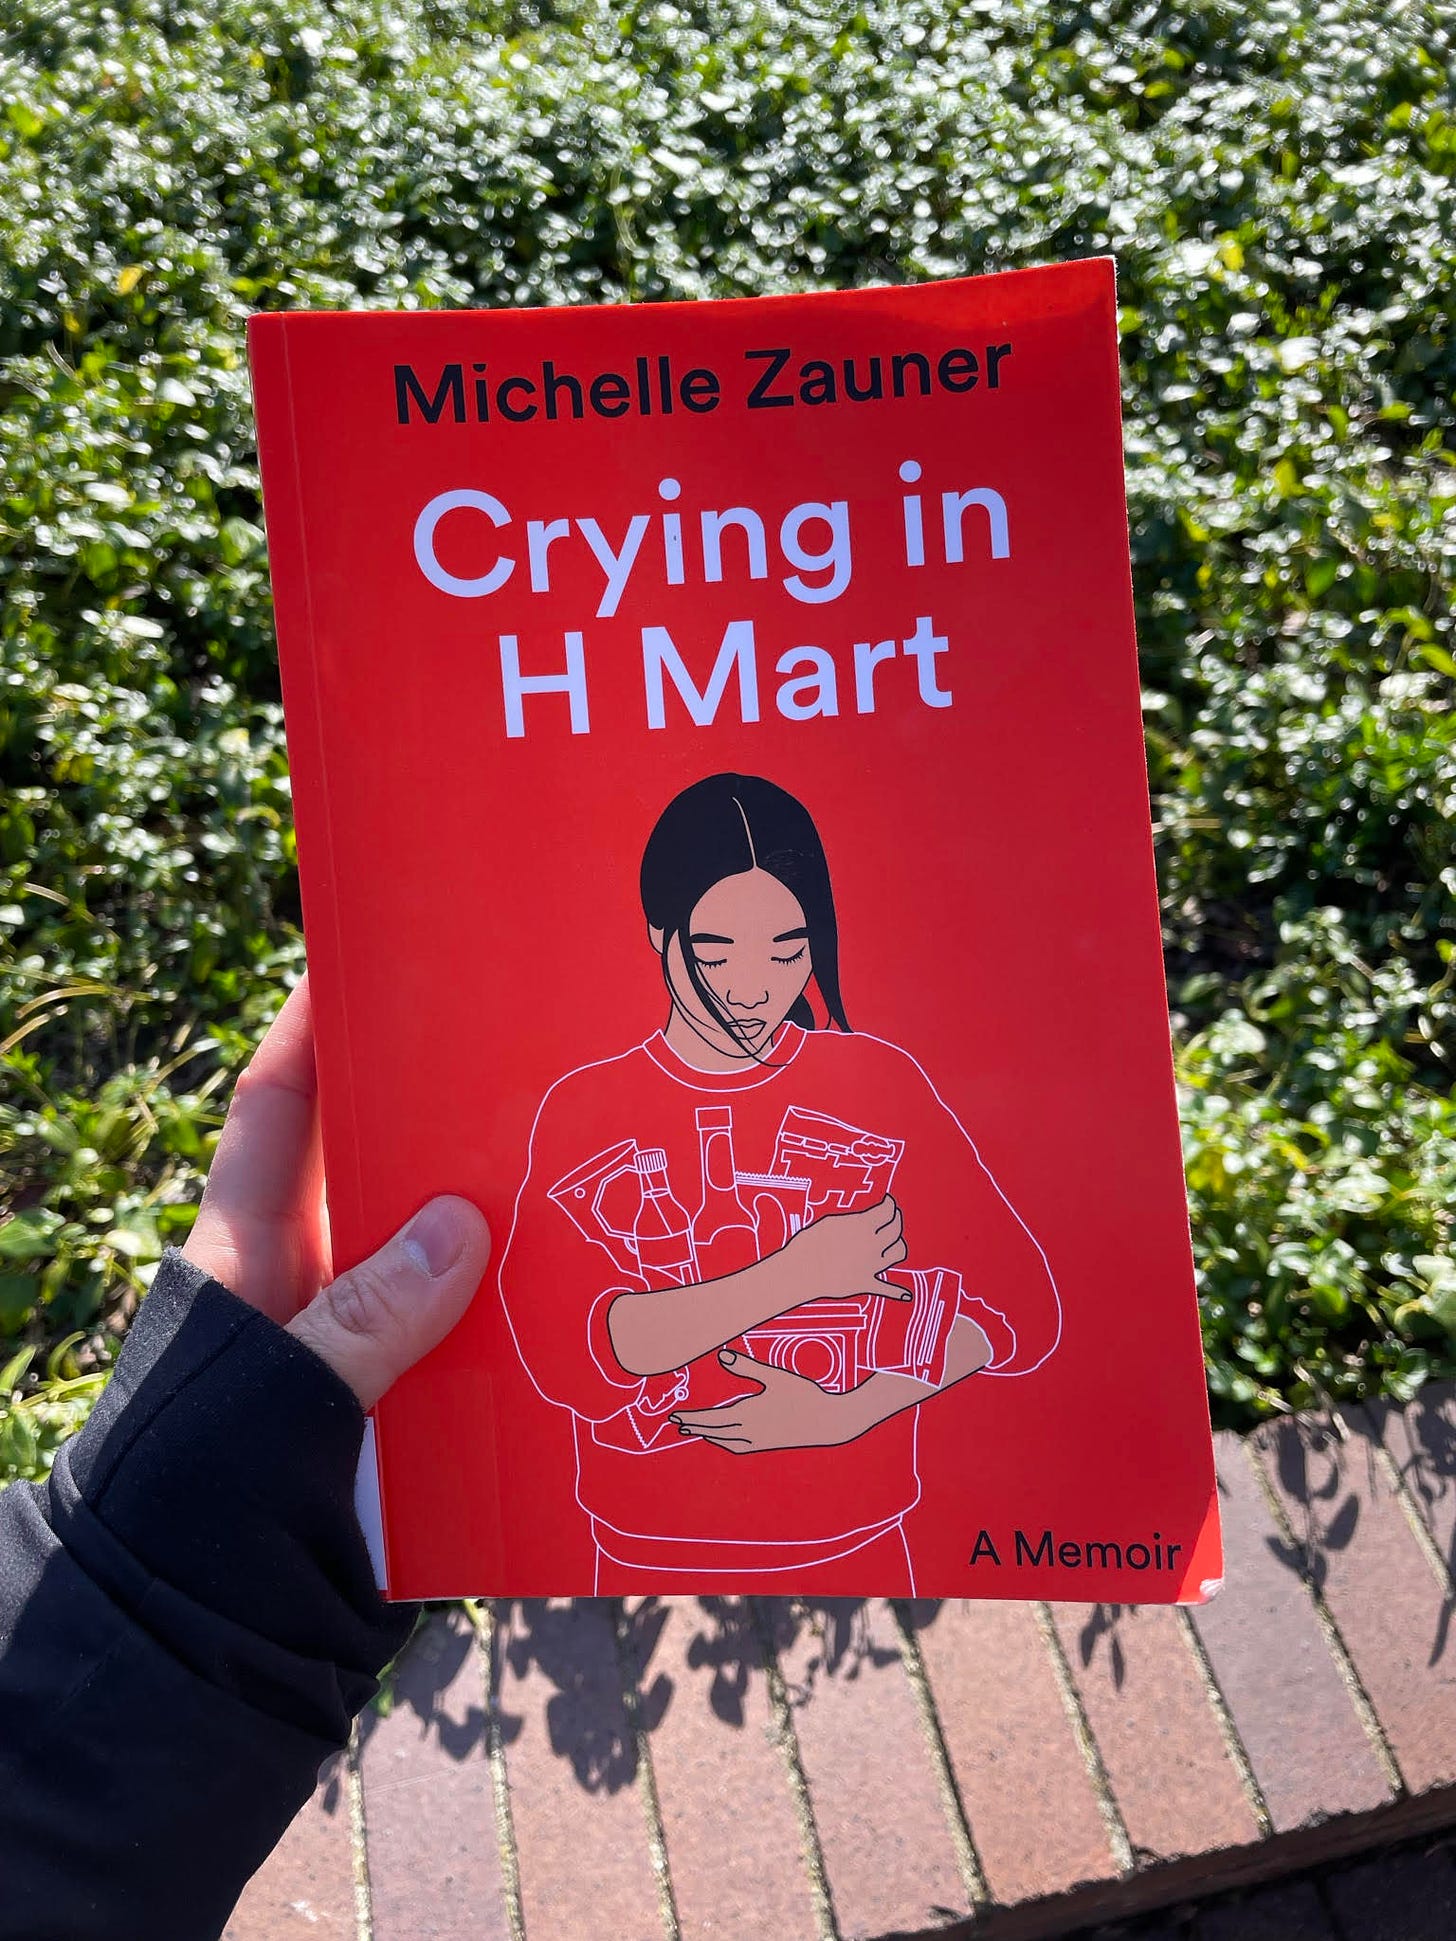 Crying in H Mart book by Michelle Zauner, photographed outside